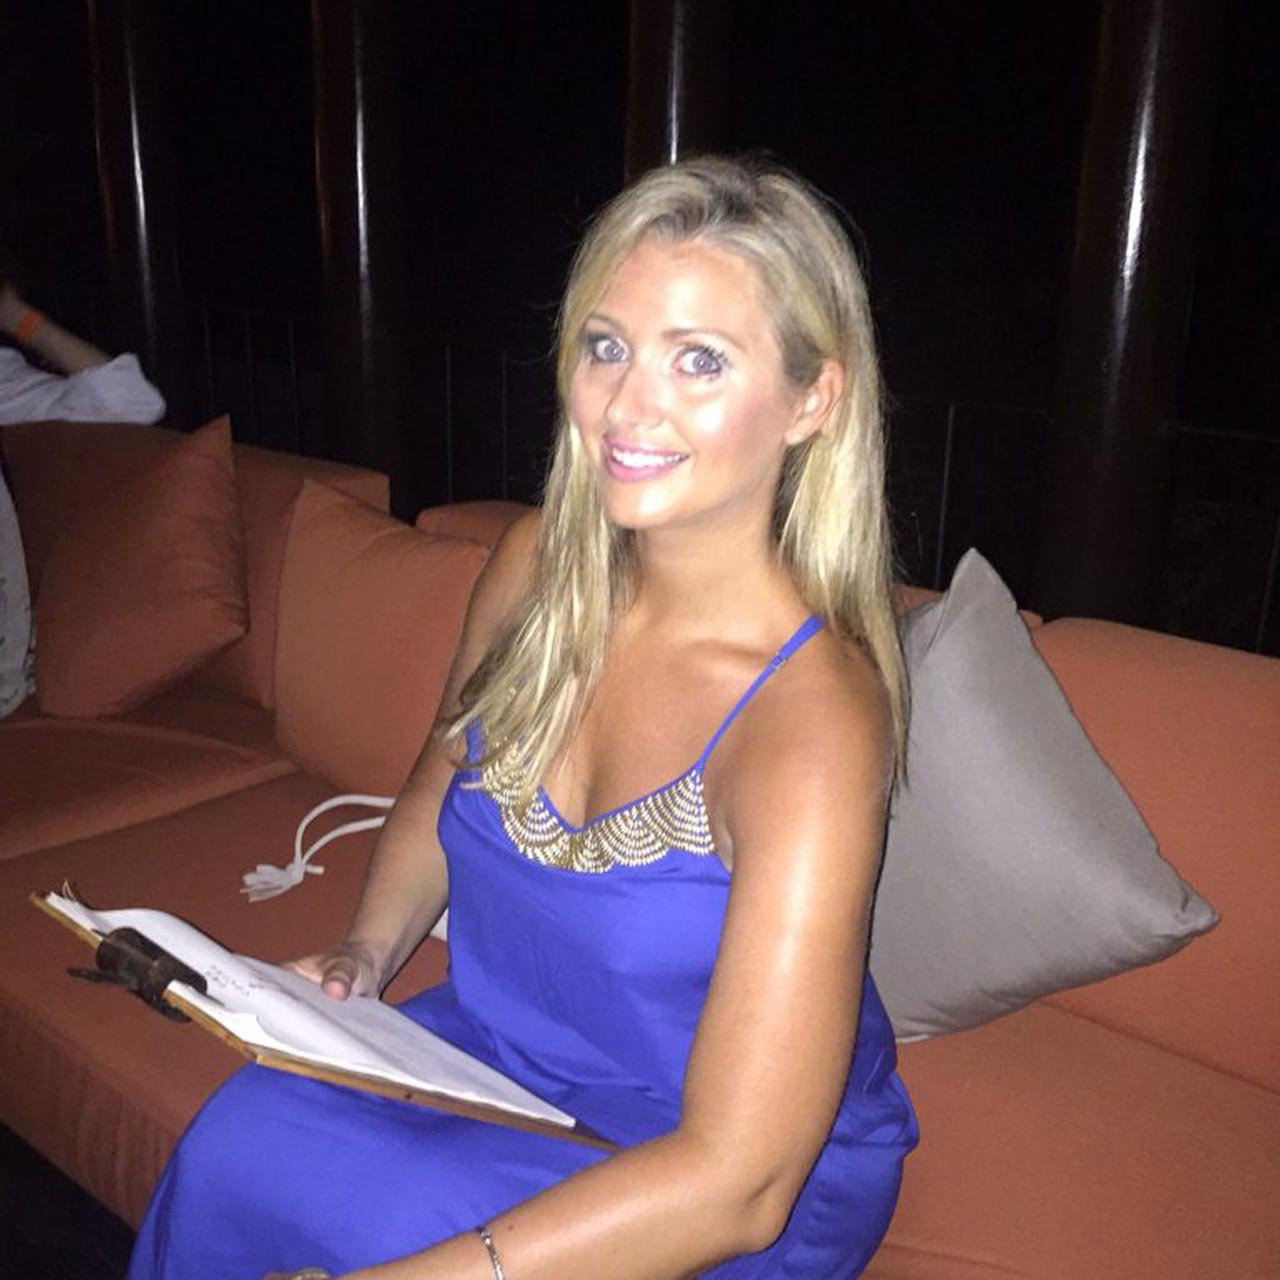 Hayley McQueen Leaked Nude Photos - This TV Host Showed Big Tits & Puss...